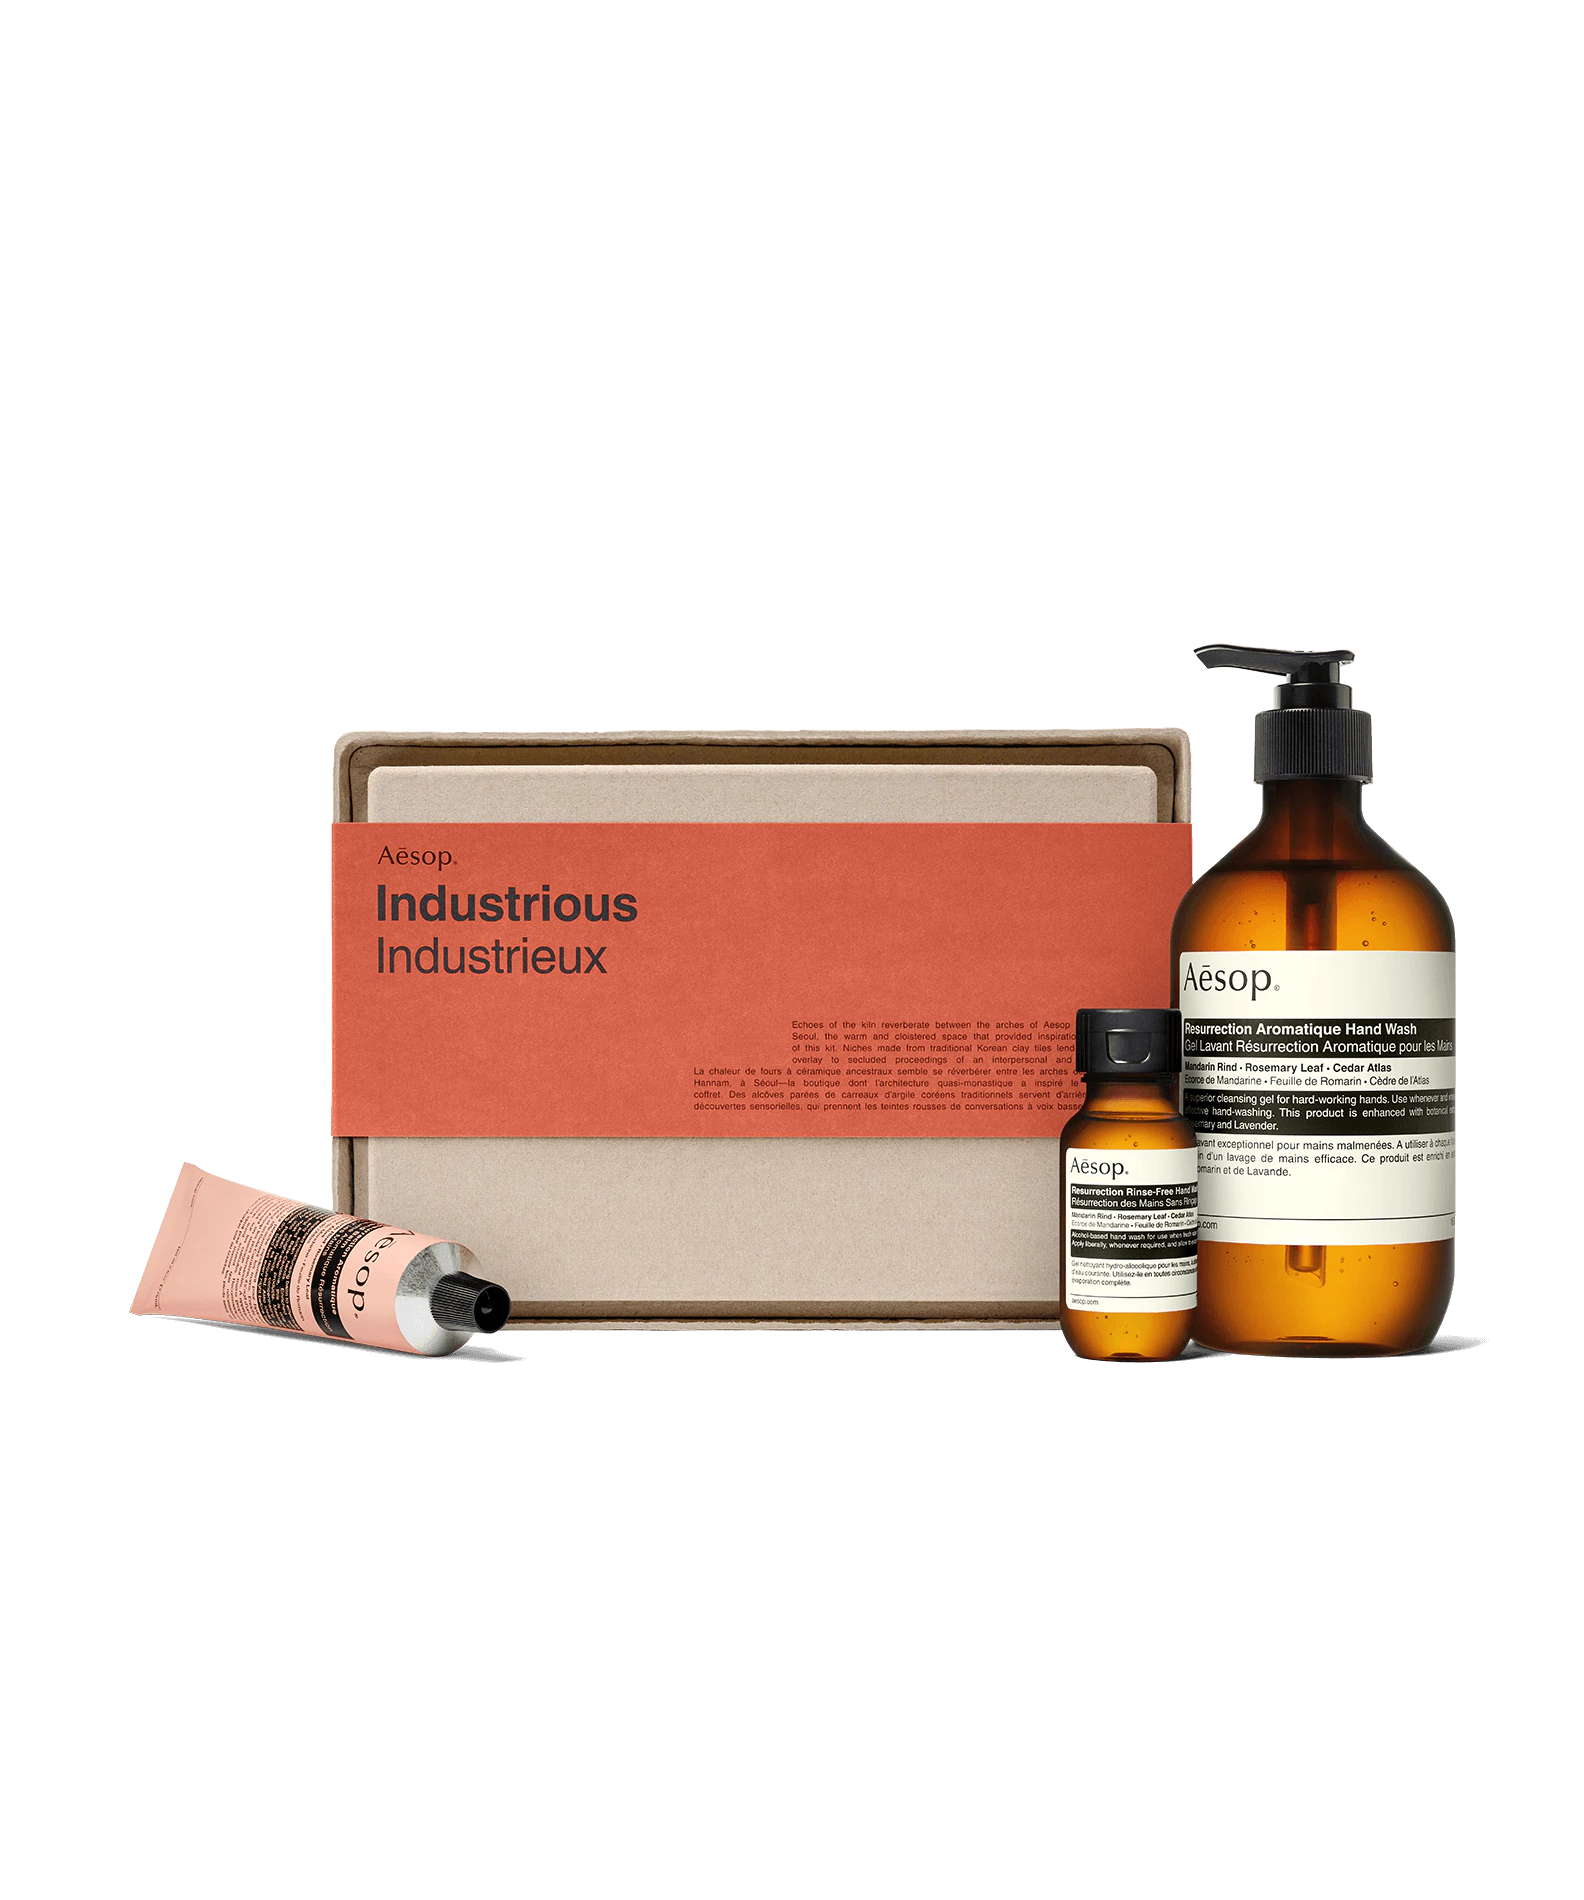 Image of the Aesop Industrious gift set. The image shows the box, hand cream, rinse-free hand wash and hand wash